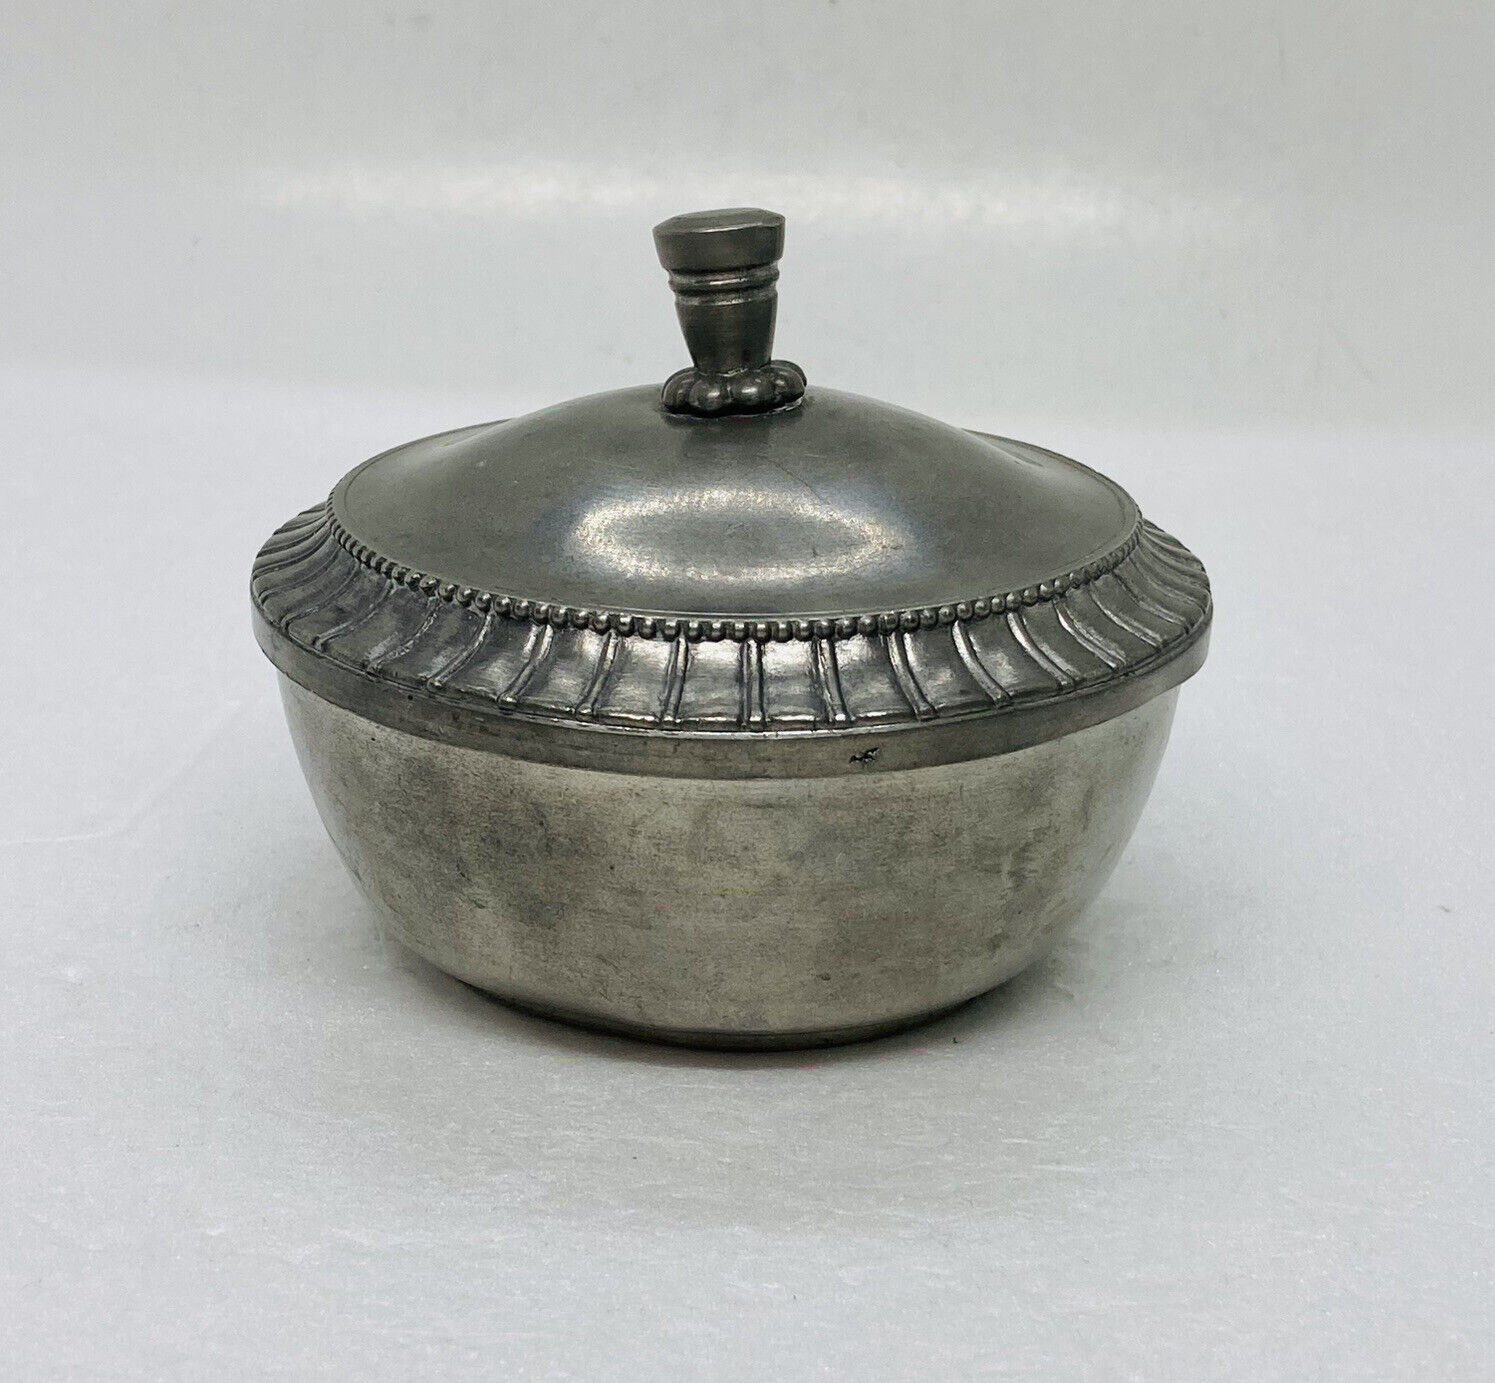 Antique 1950s Tight Lidded Dish Container Silverplated Bowl Sidedish c3